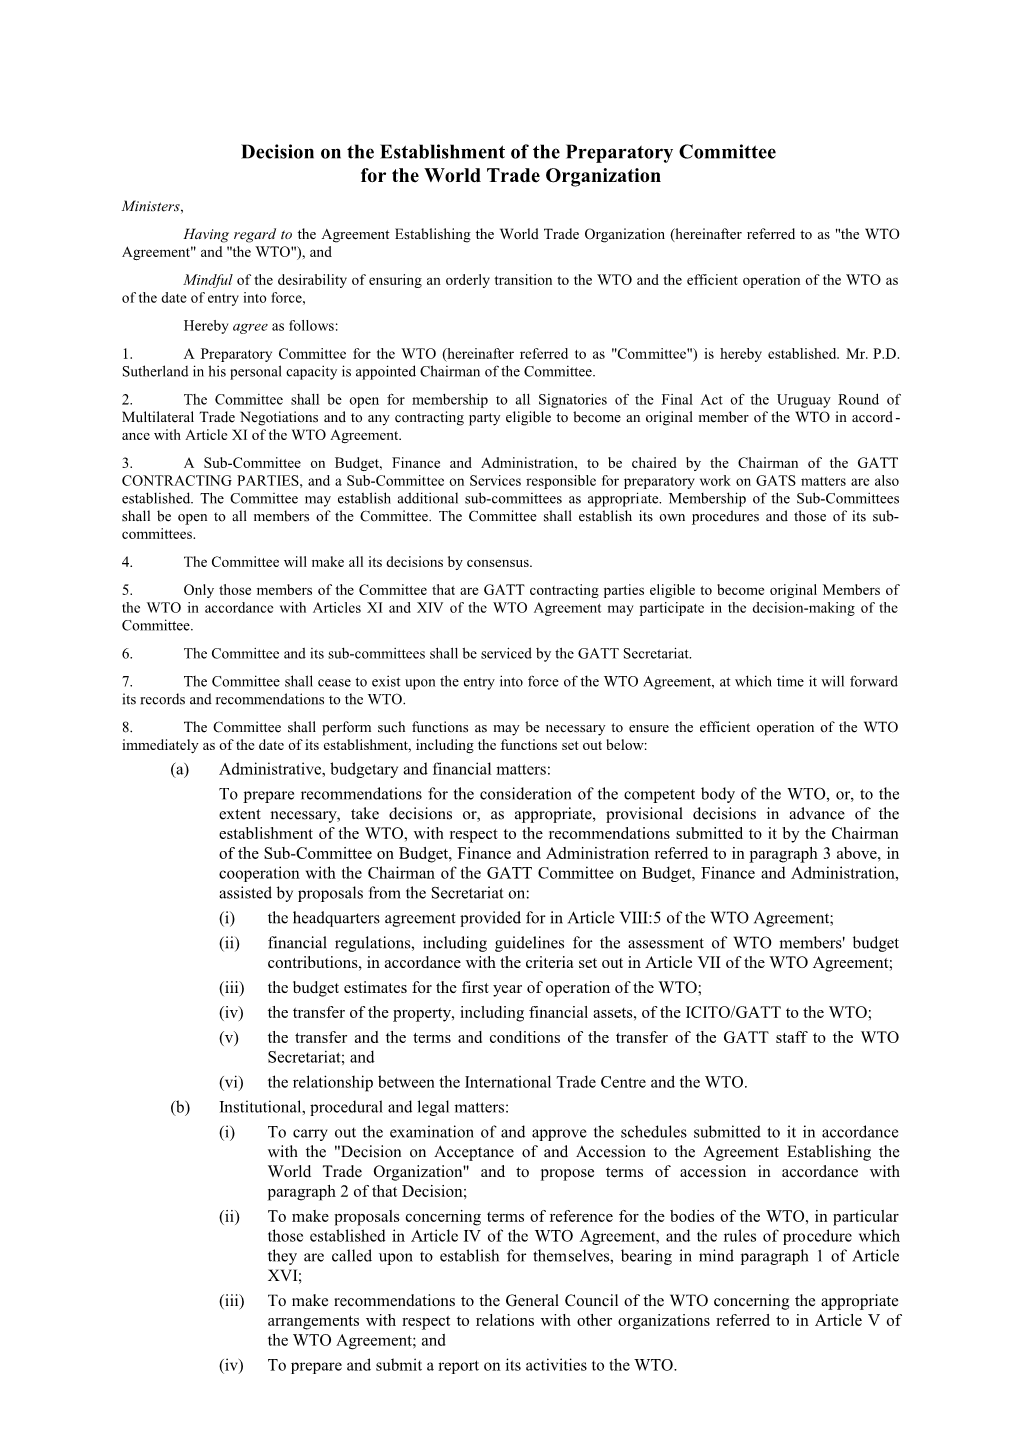 Decision on the Acceptance of and Accession to the Agreement Establishing the World Trade